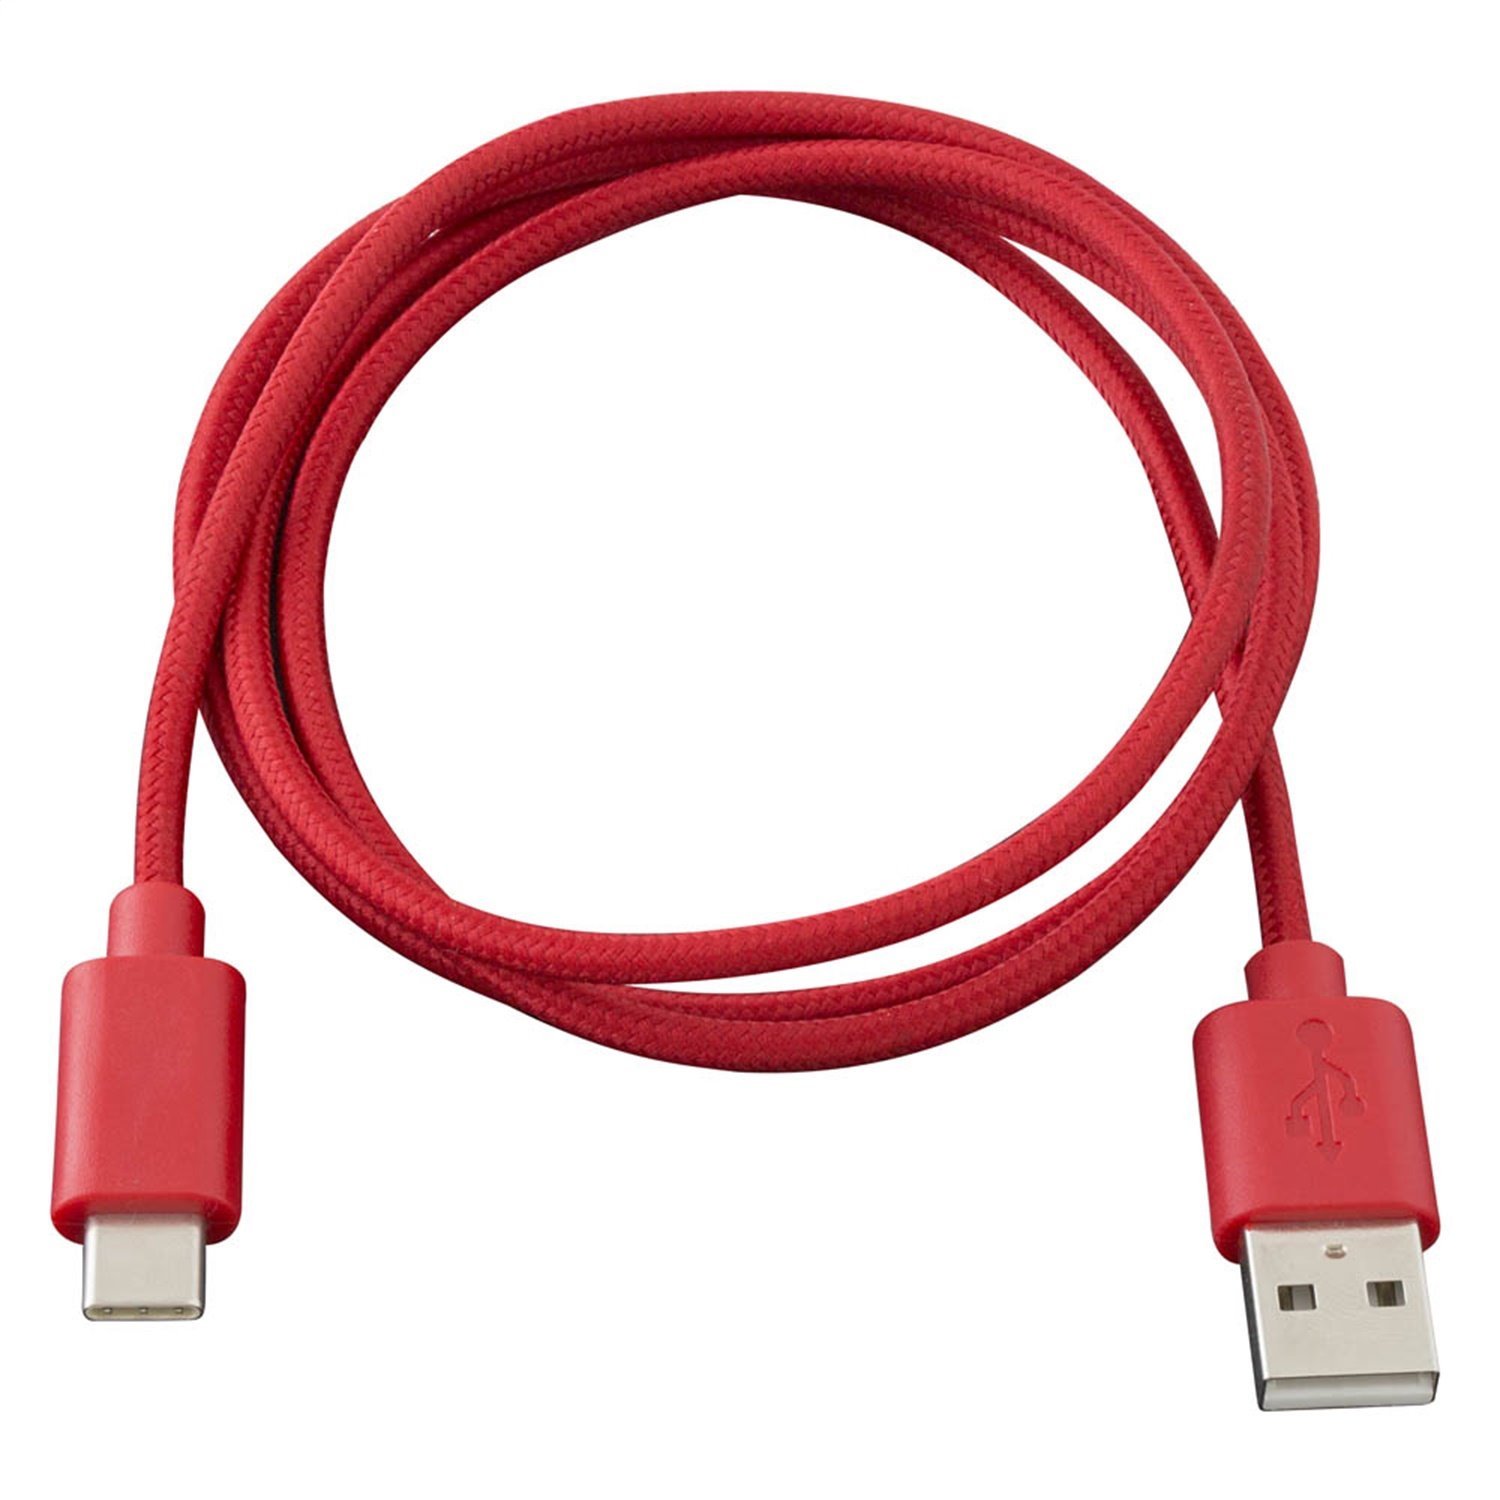 AXUSBC-RD USB Type C Cable, 3 ft., Red